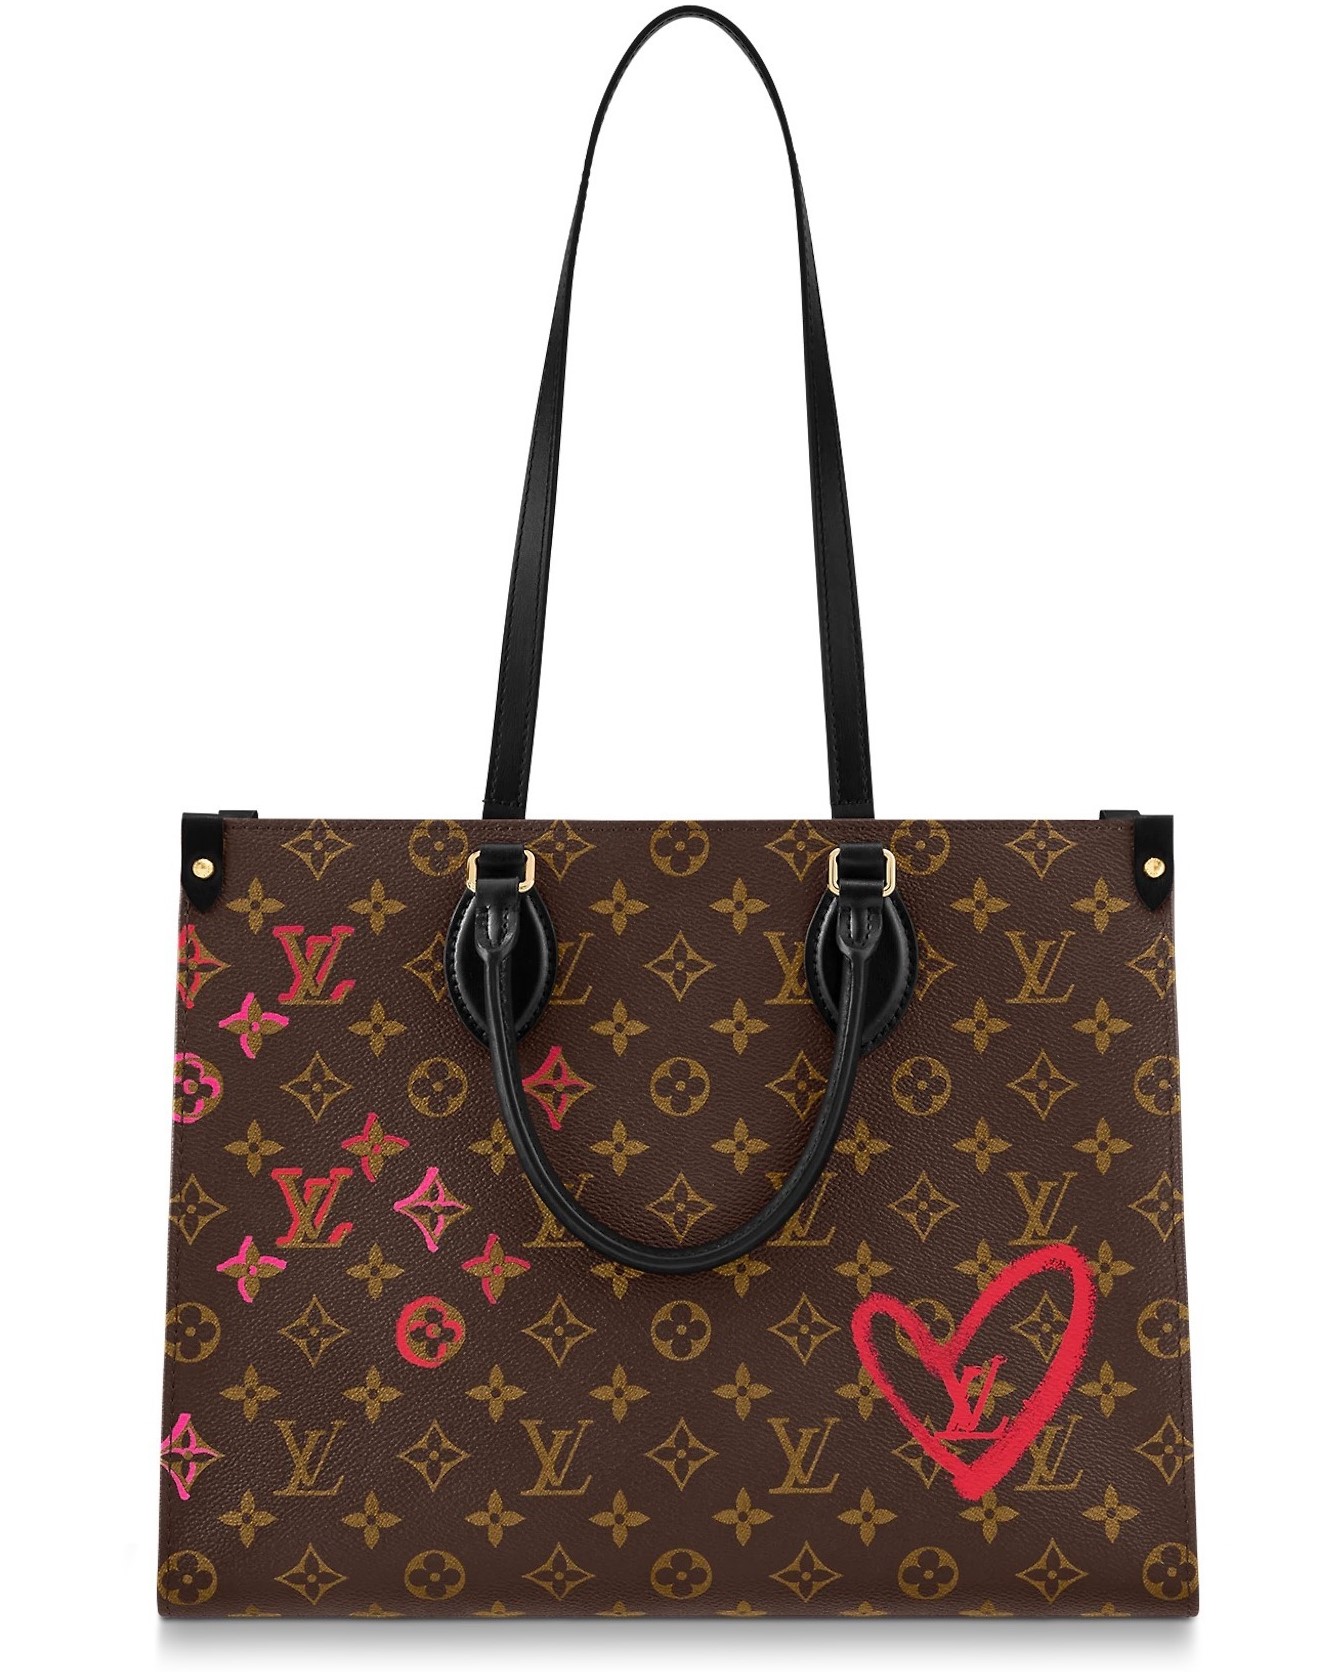 TÚI XÁCH LOUIS VUITTON LV TOTE ONTHEGO LIMITED EDITION FALL IN LOVE MONOGRAM CANVAS MM 5